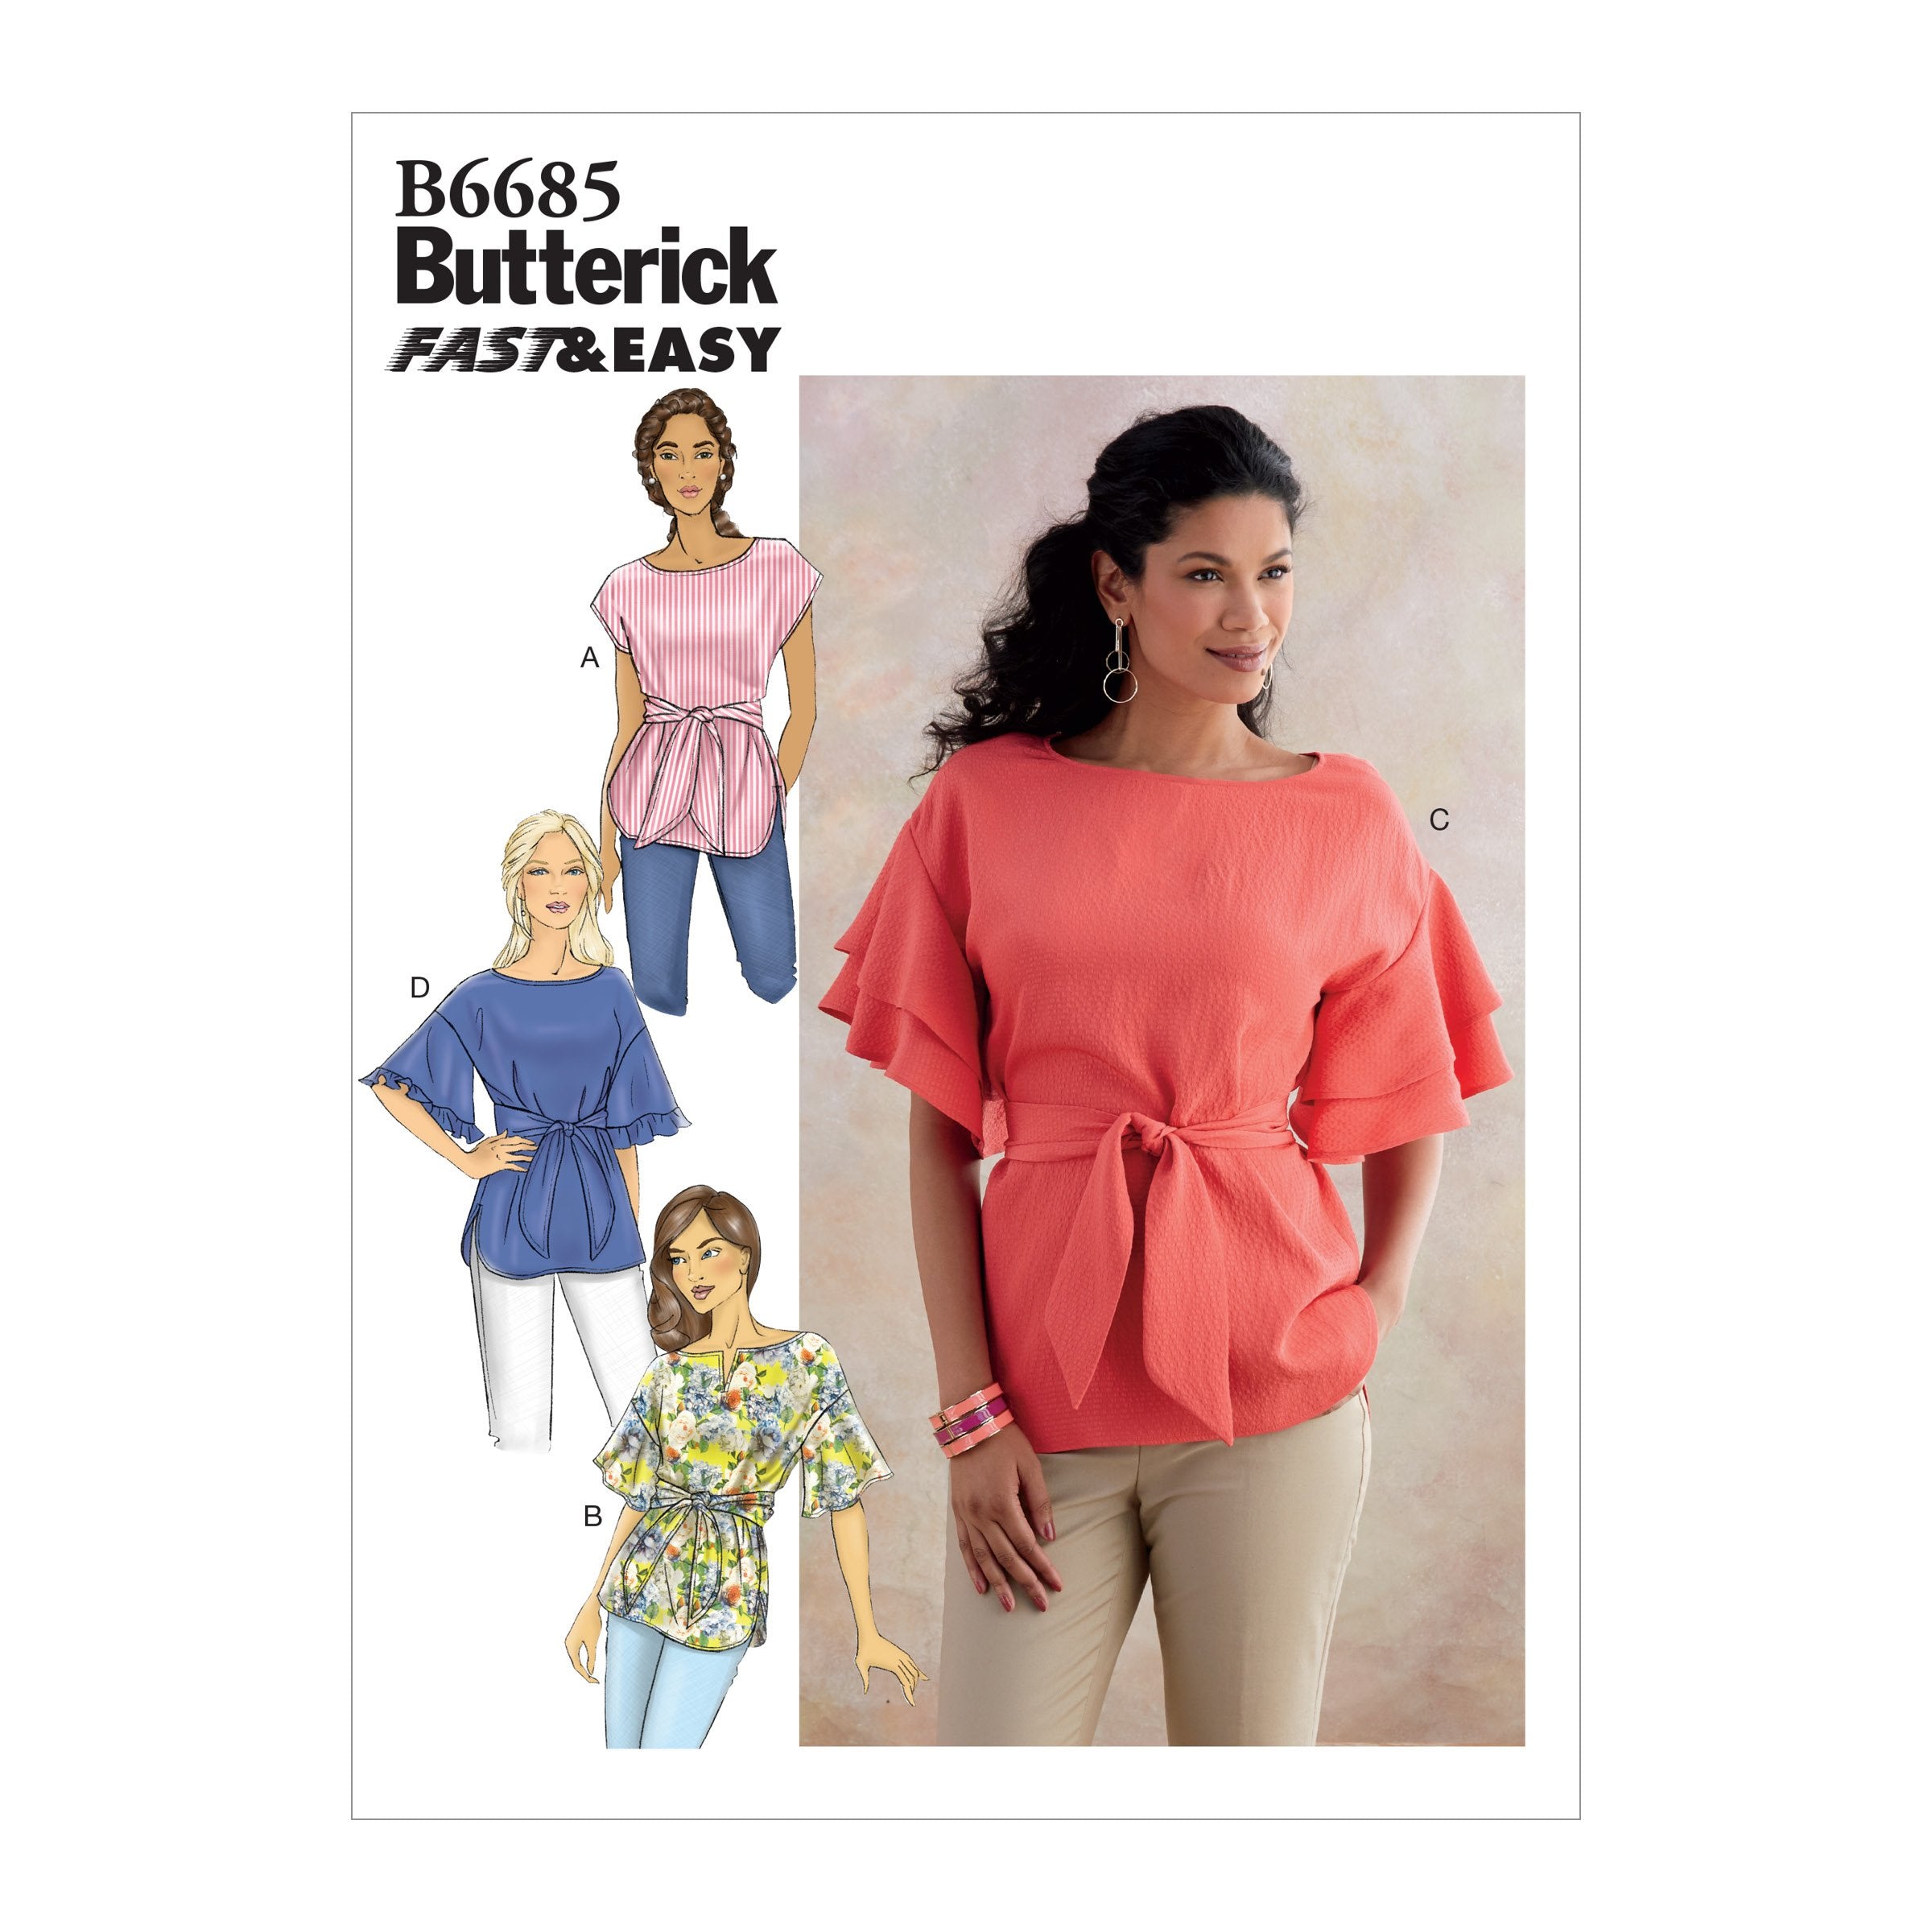 Butterick B6685 Misses' Top and Sash | Very Easy from Jaycotts Sewing Supplies